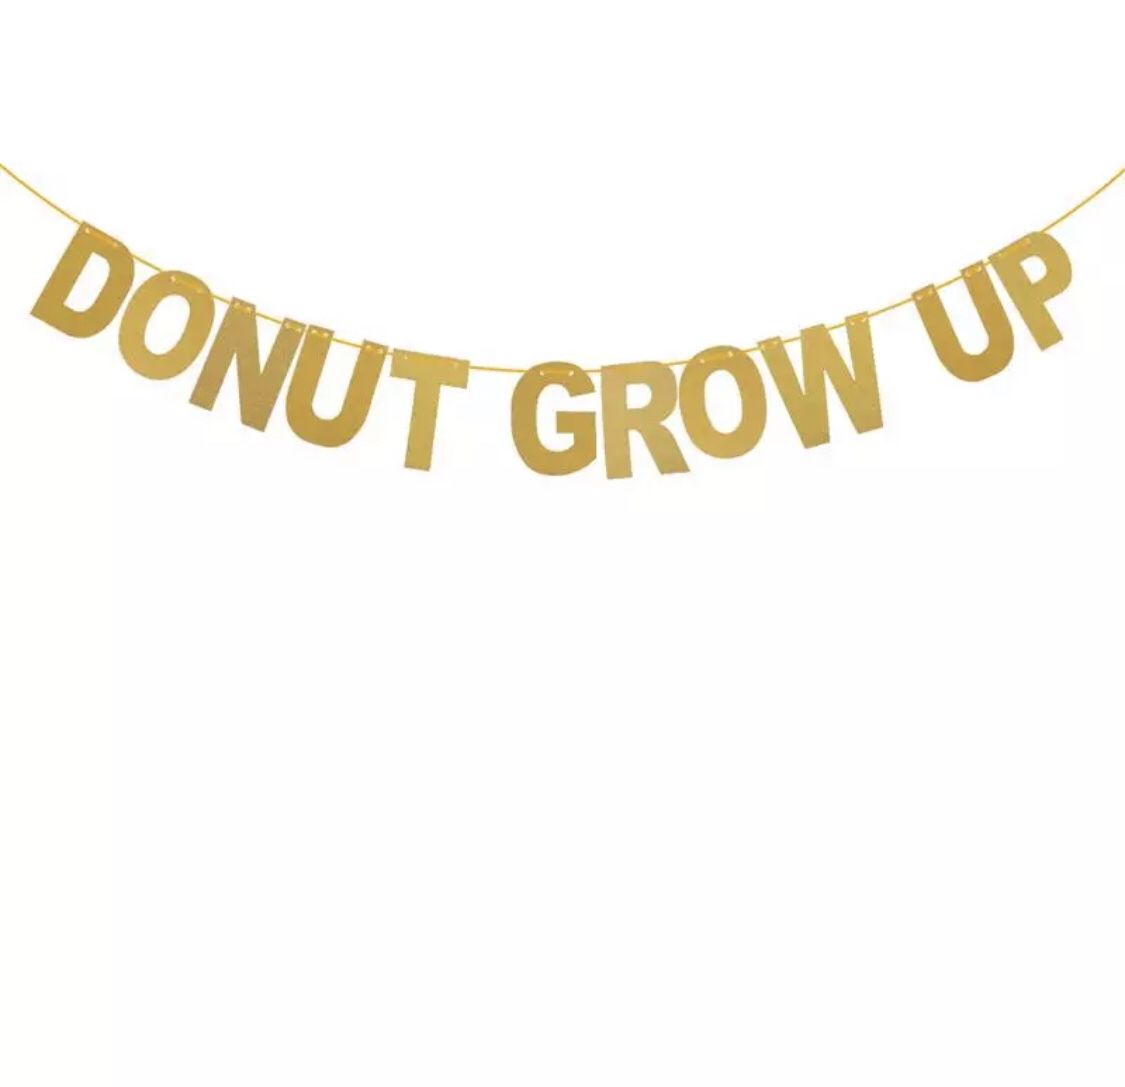 DONUT GROW UP Gold Glitter Party Banner Birthday Party Bunting Donut Theme Party Decorations